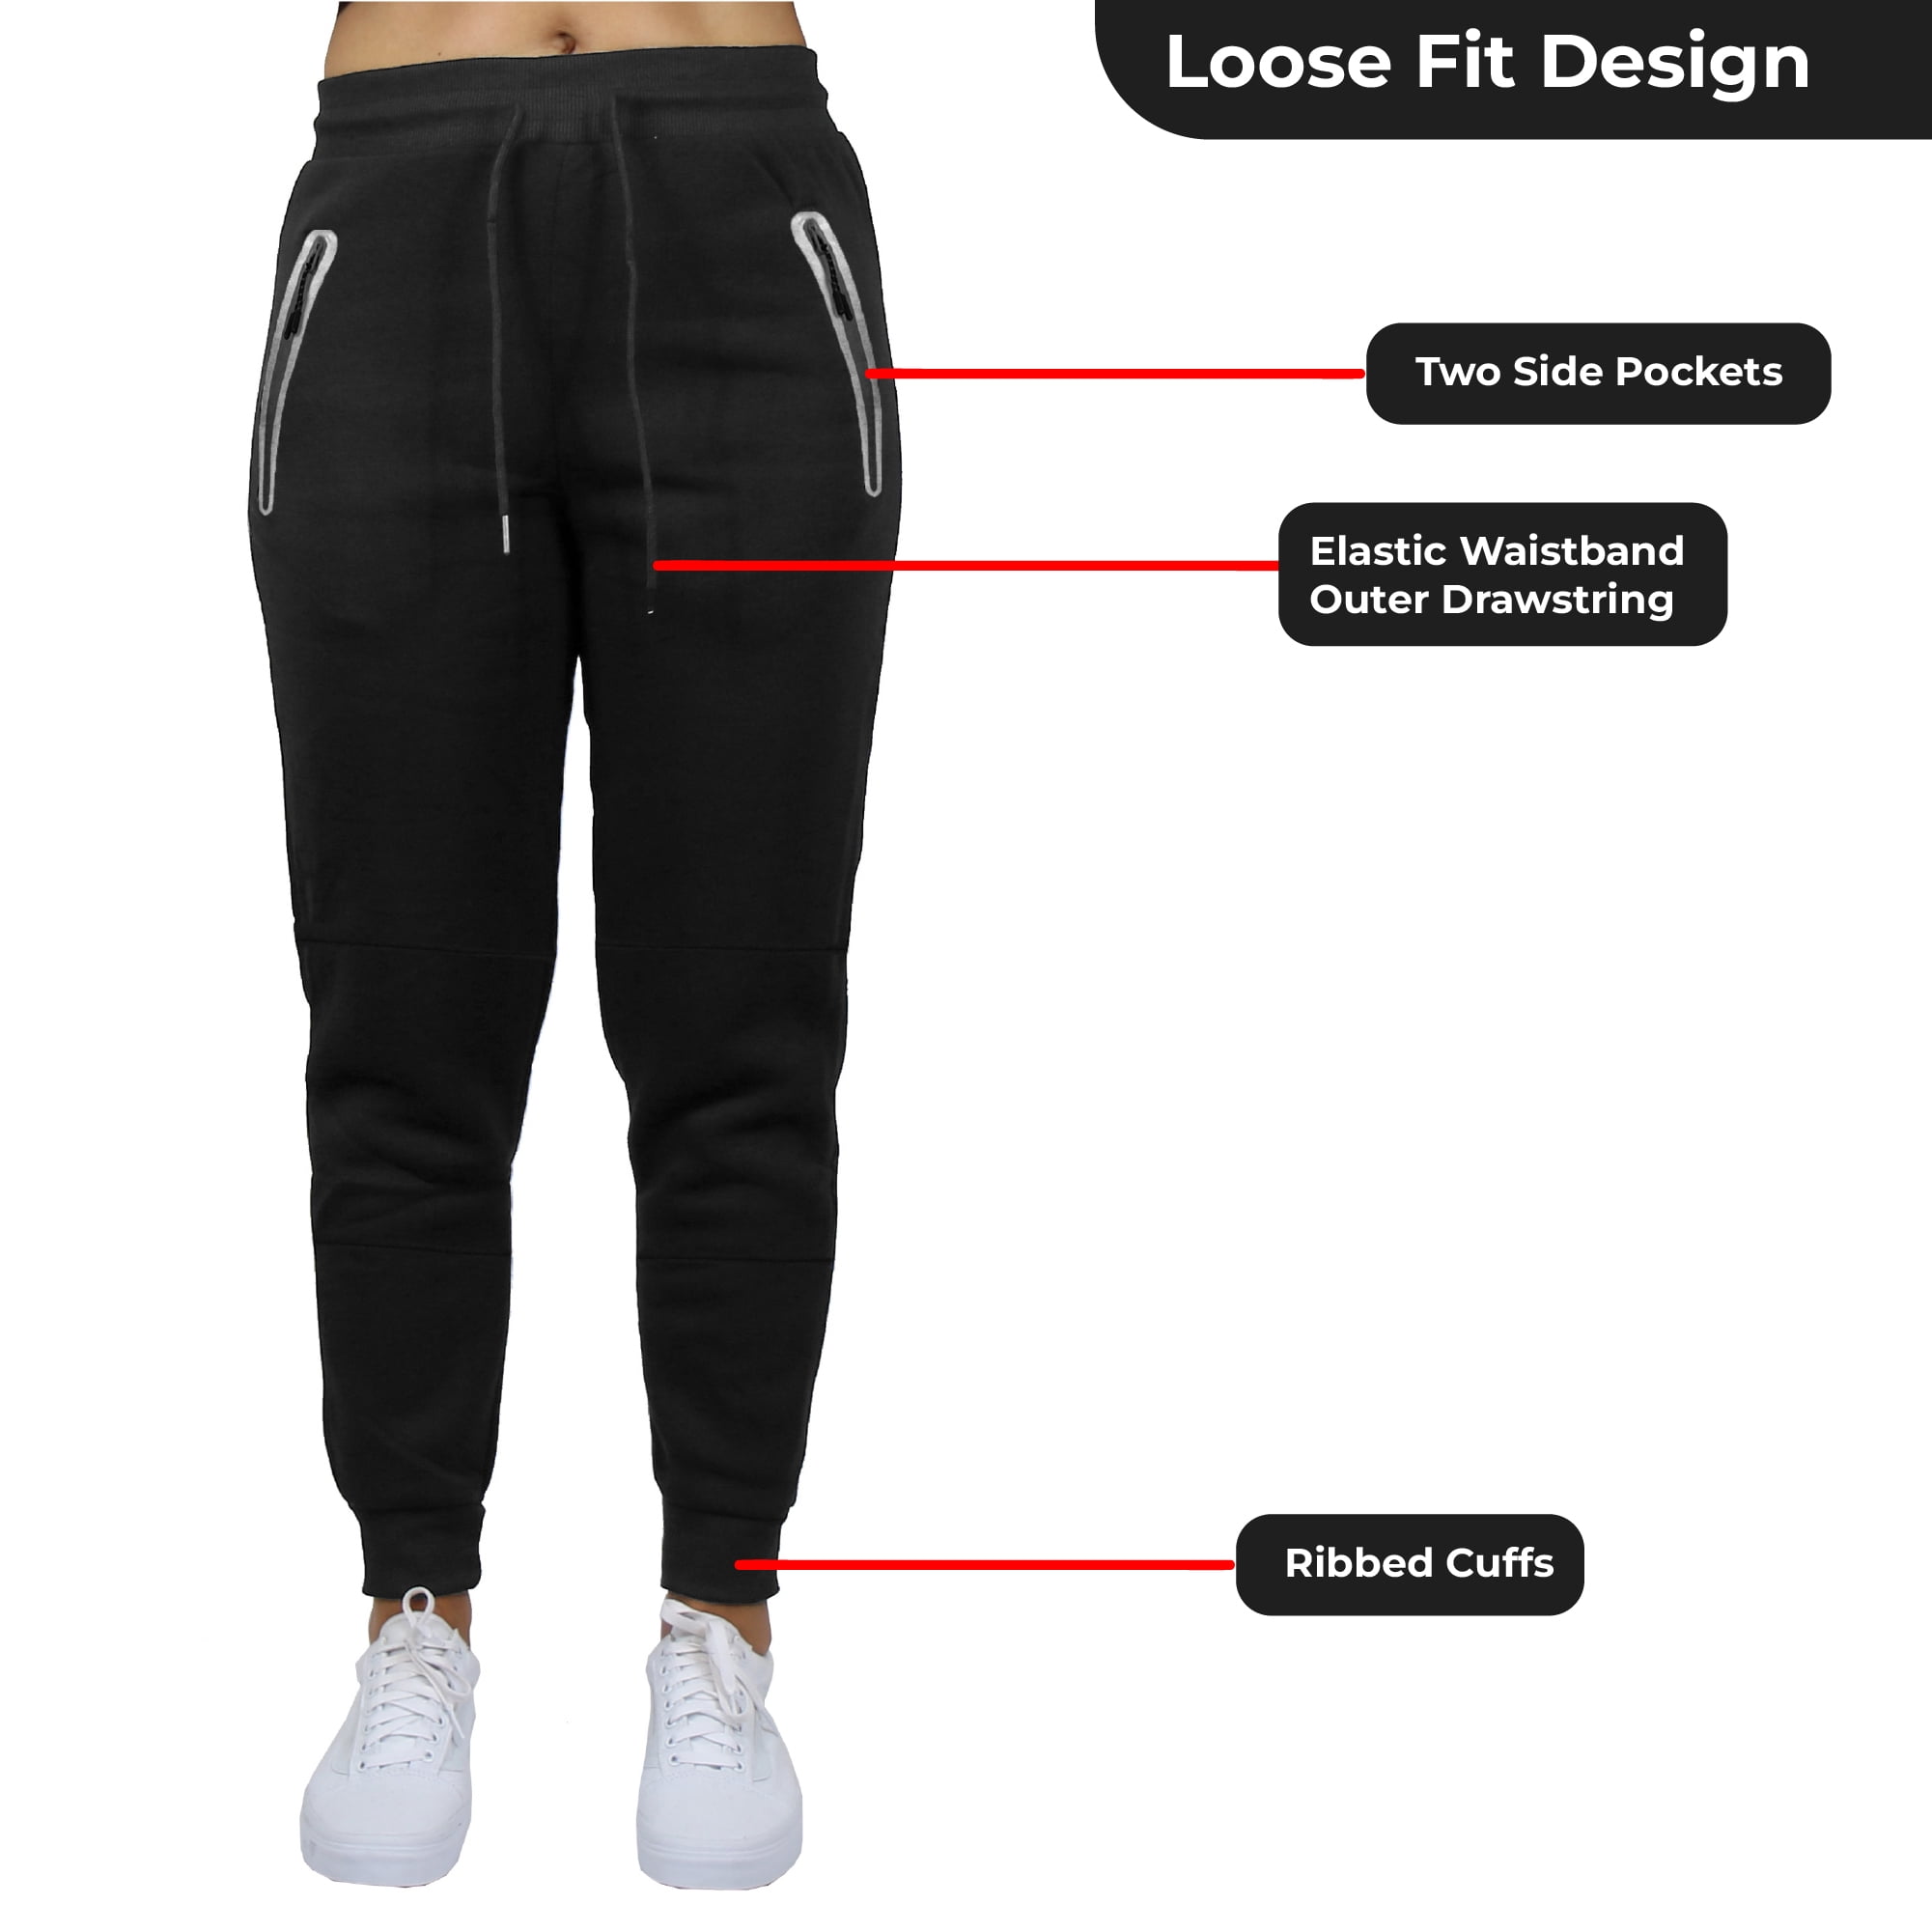 How To Remove Drawstring Sweatpants? – solowomen